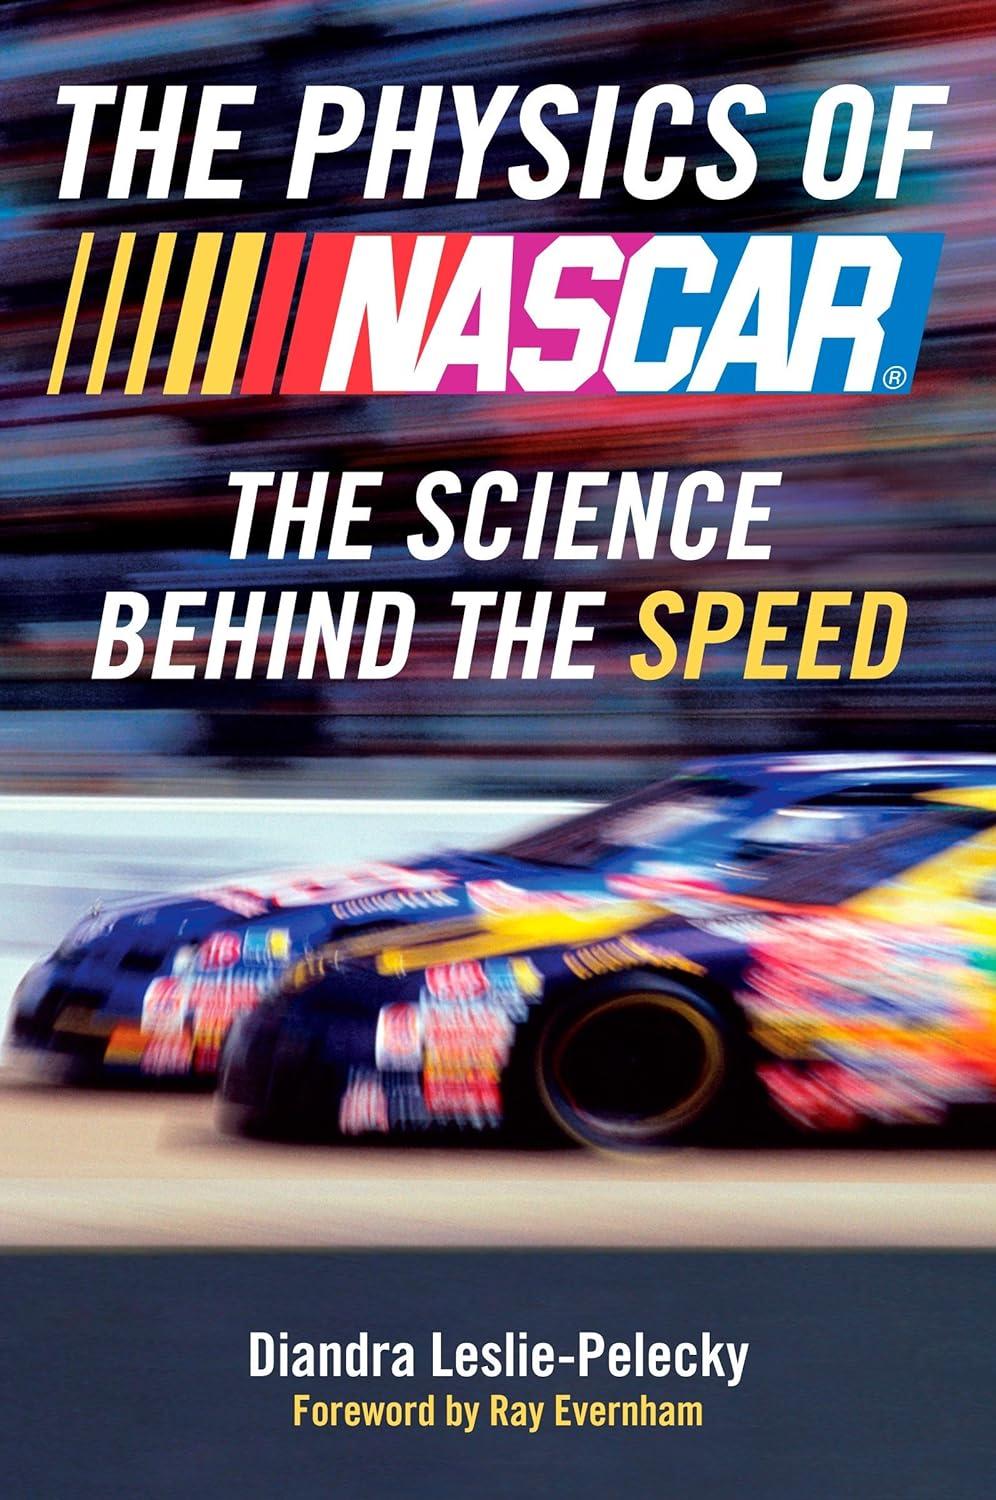 the physics of nascar the science behind the speed 1st edition diandra leslie-pelecky, ray evernham